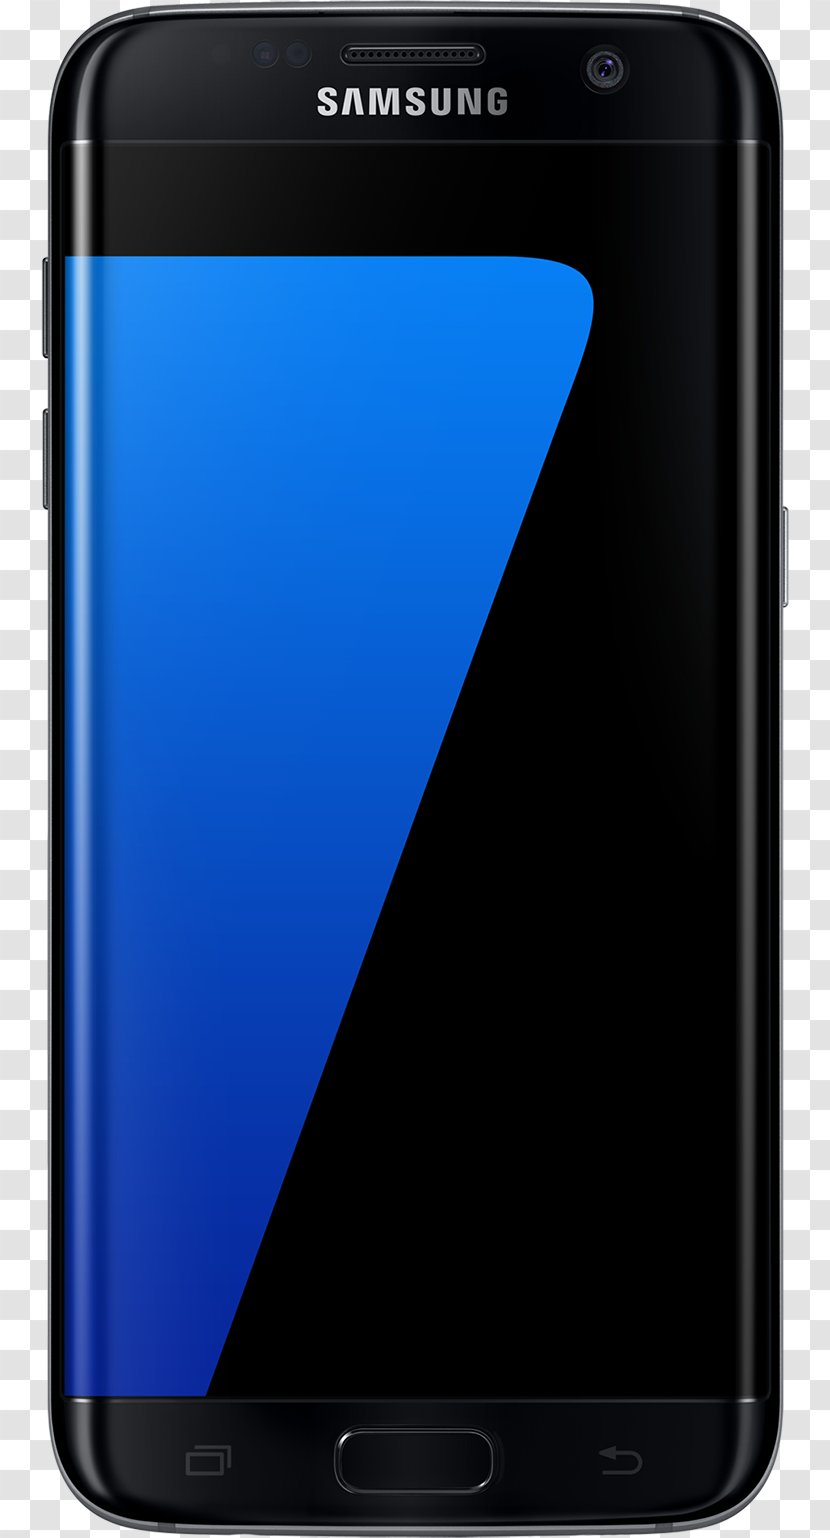 Samsung GALAXY S7 Edge Galaxy S6 Front-facing Camera Android - Cellular Network Transparent PNG